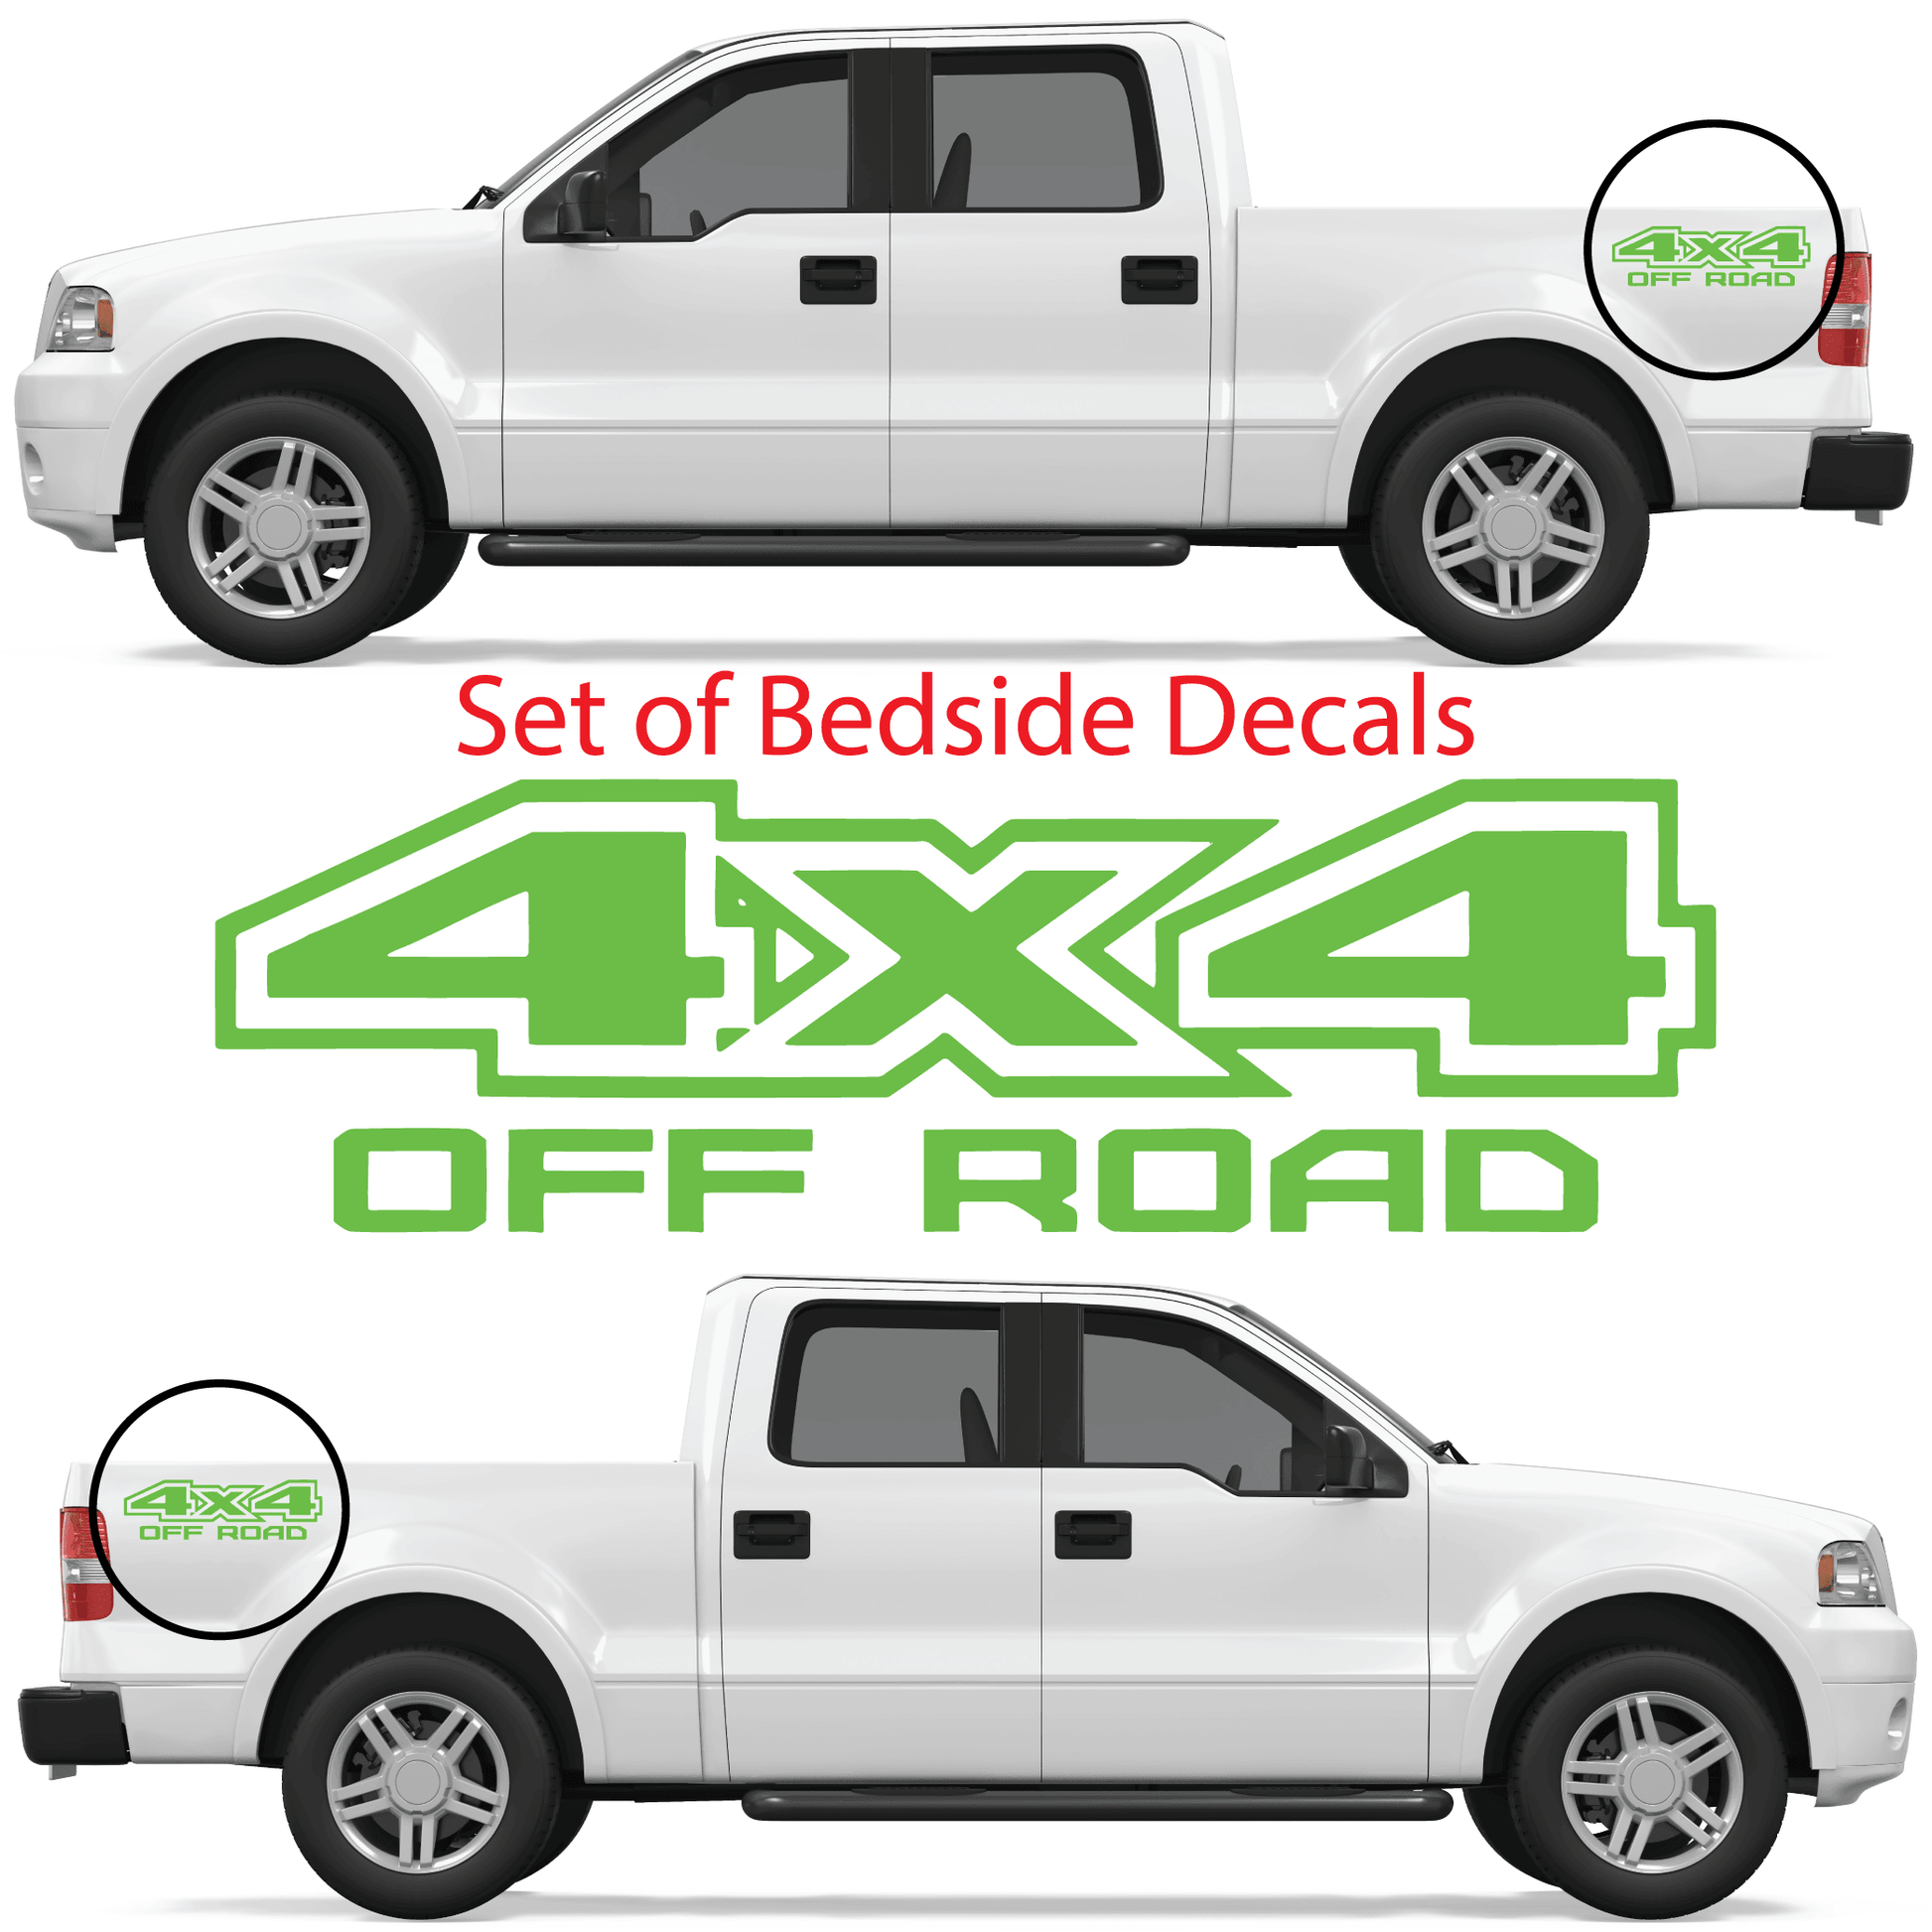 Shop Vinyl Design F-150 F-250 Trucks 4 x 4 Off Road Replacement Bedside Decals #05 Vehicle decal 001 Lime Green Gloss Shop Vinyl Design decals stickers